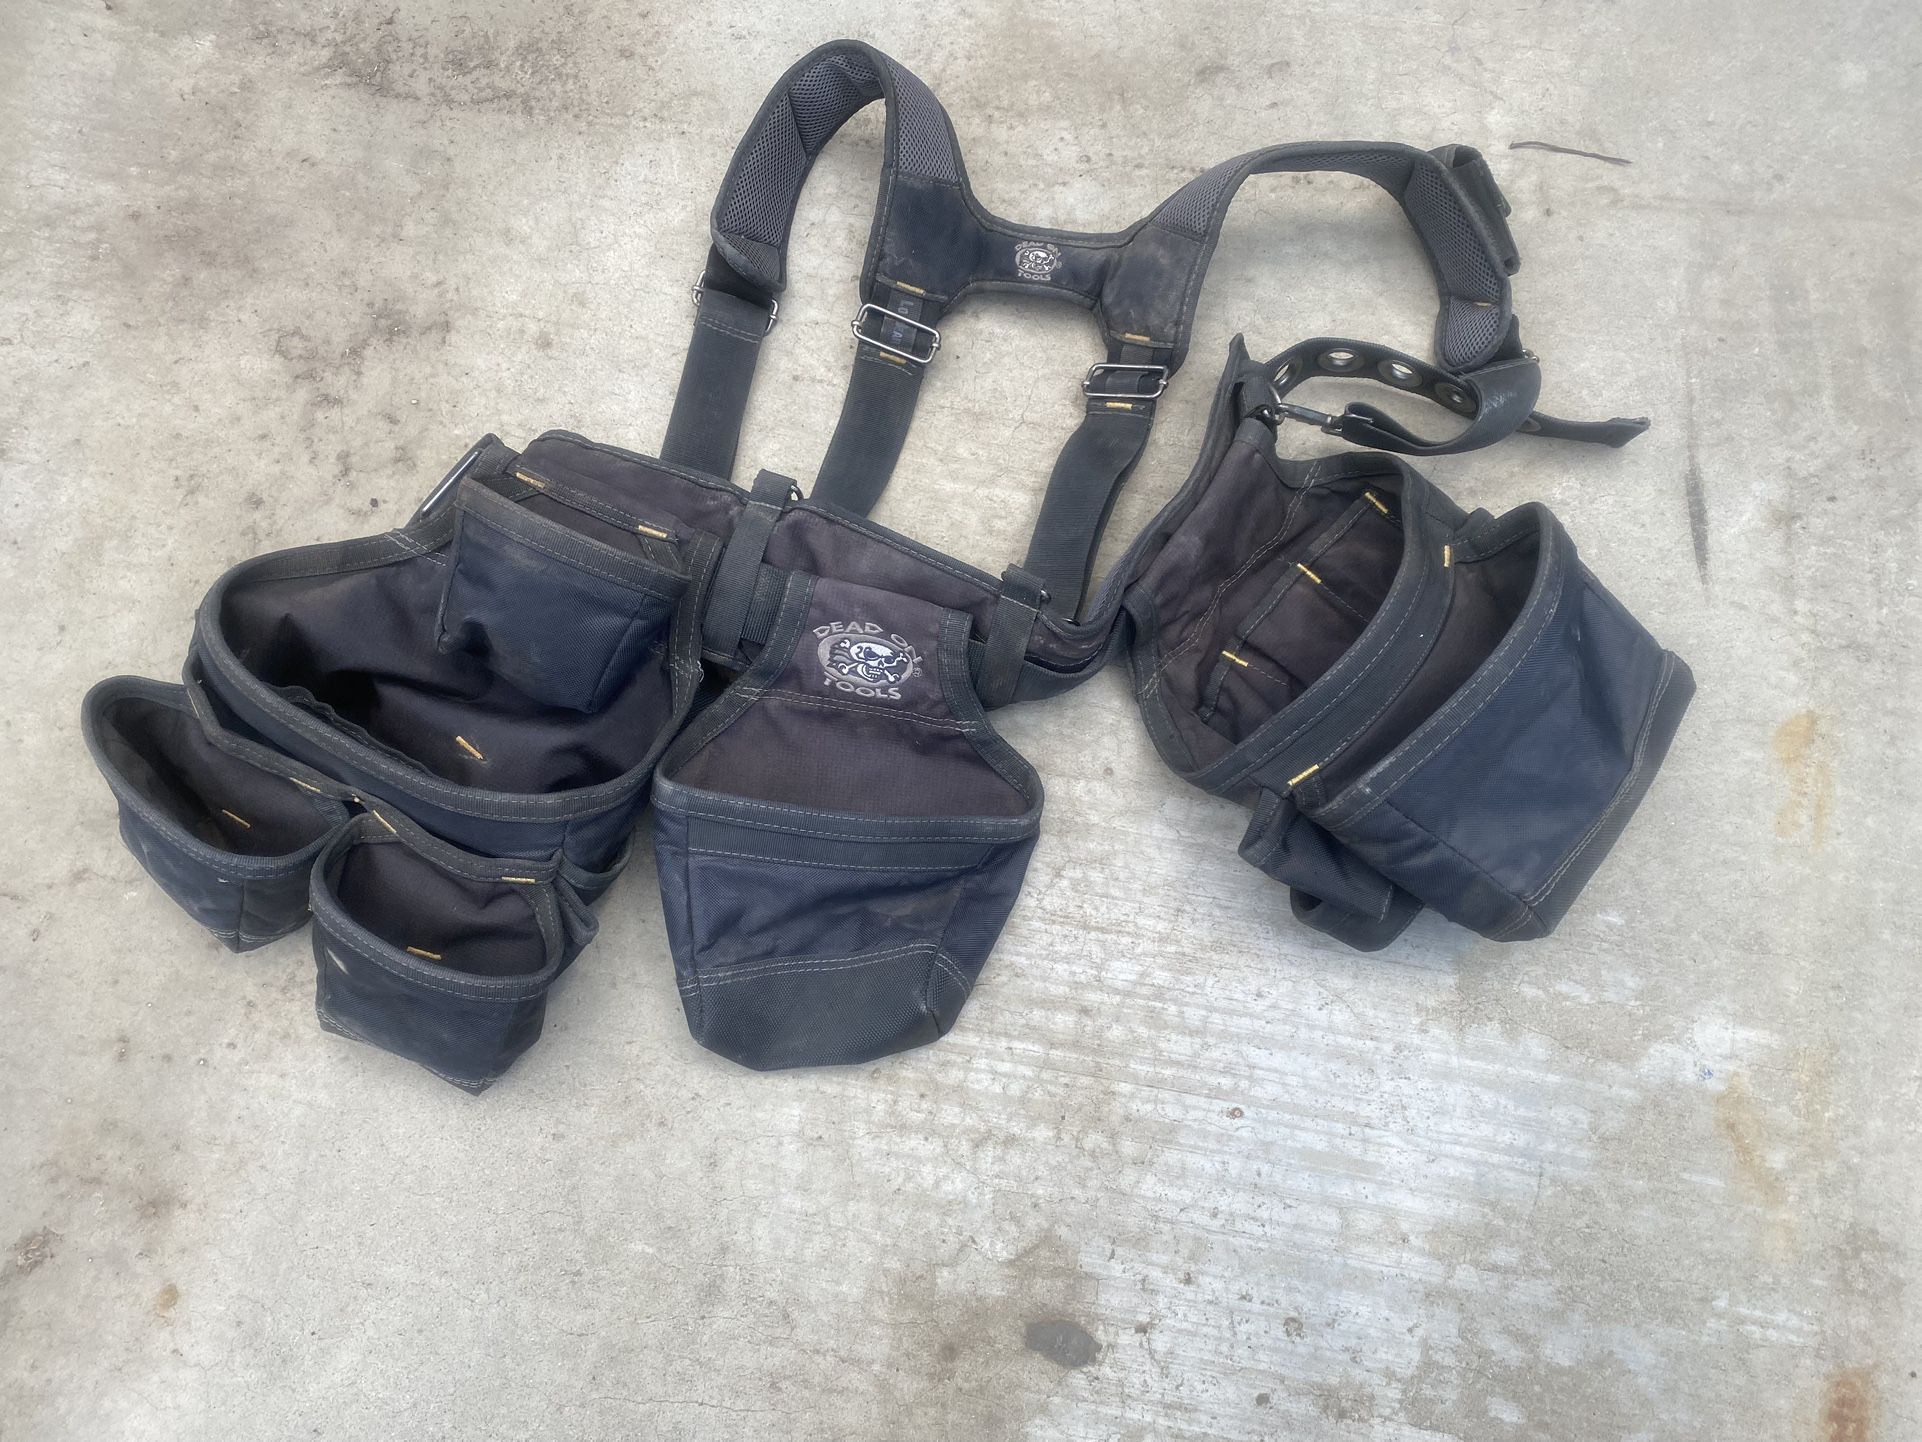 Dead On Tools Bags 